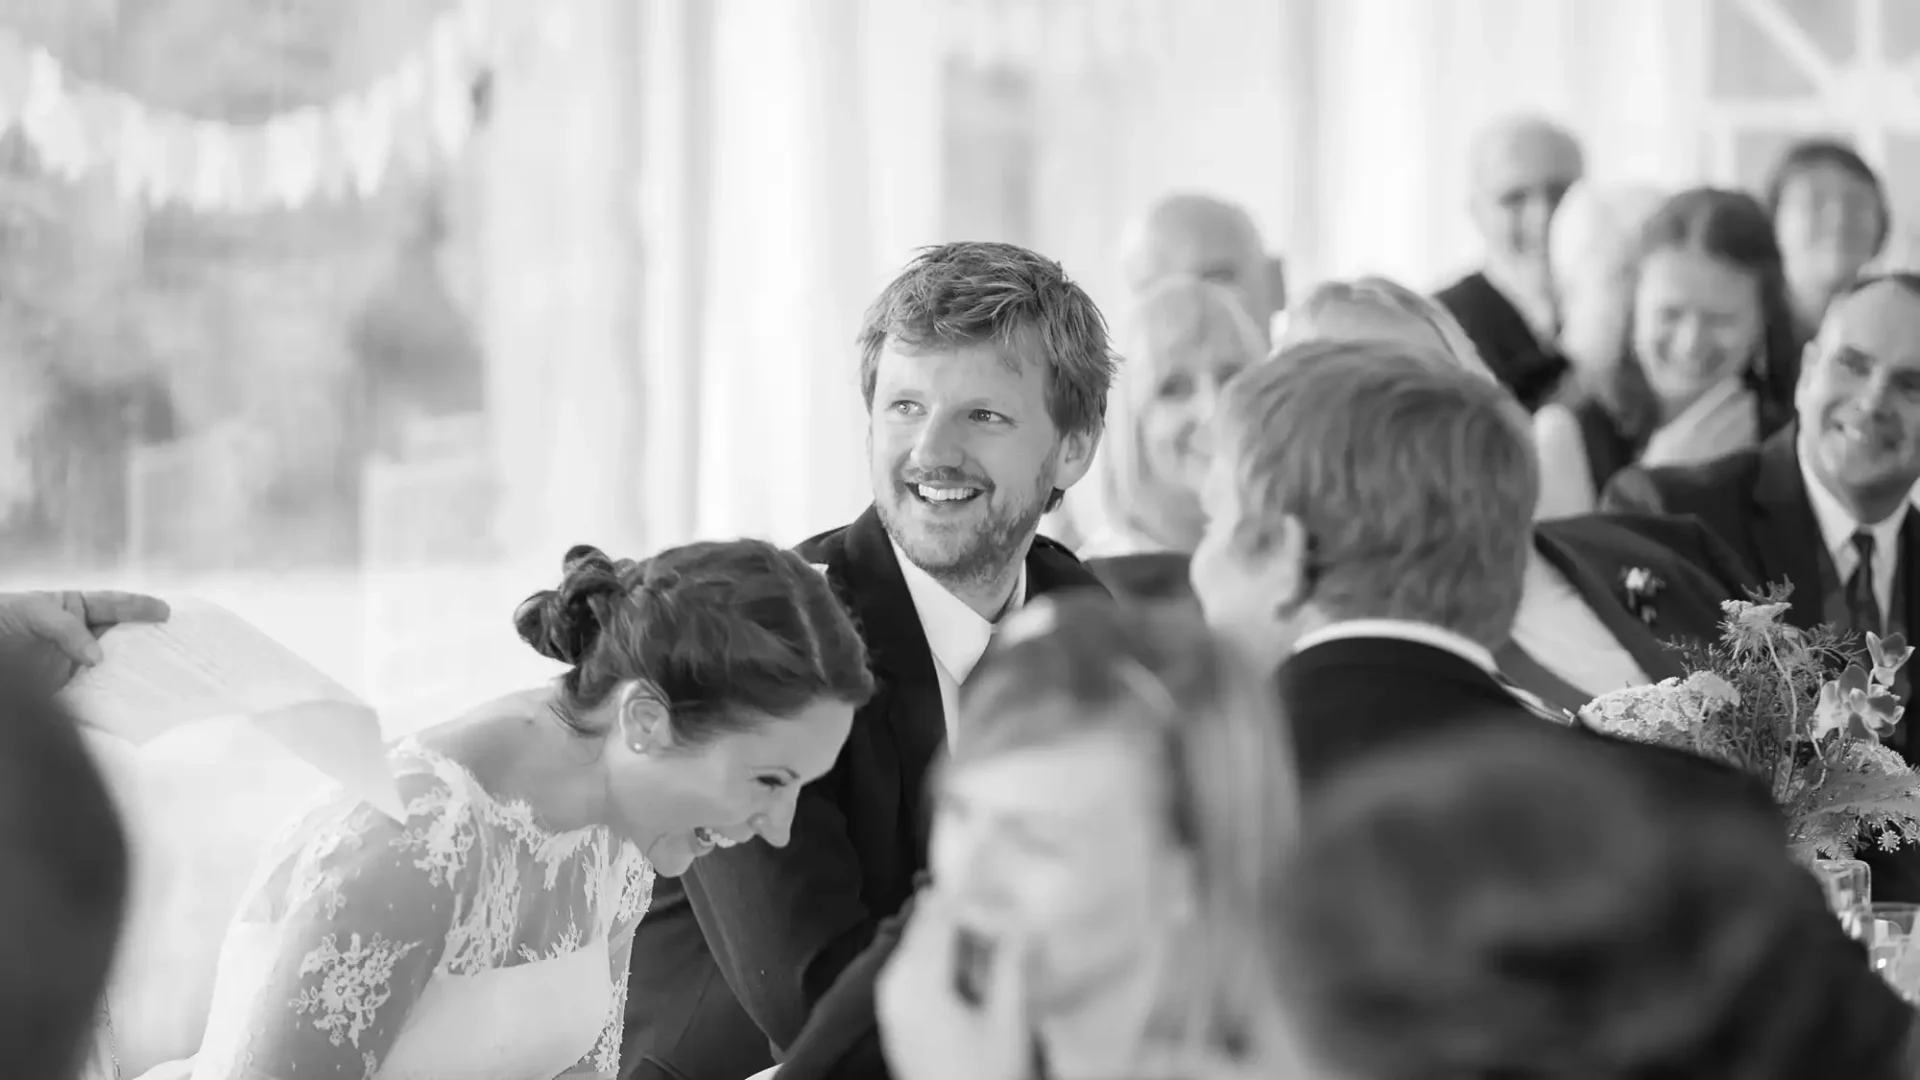 A black and white photo of a smiling bride and groom at a wedding reception, surrounded by guests.